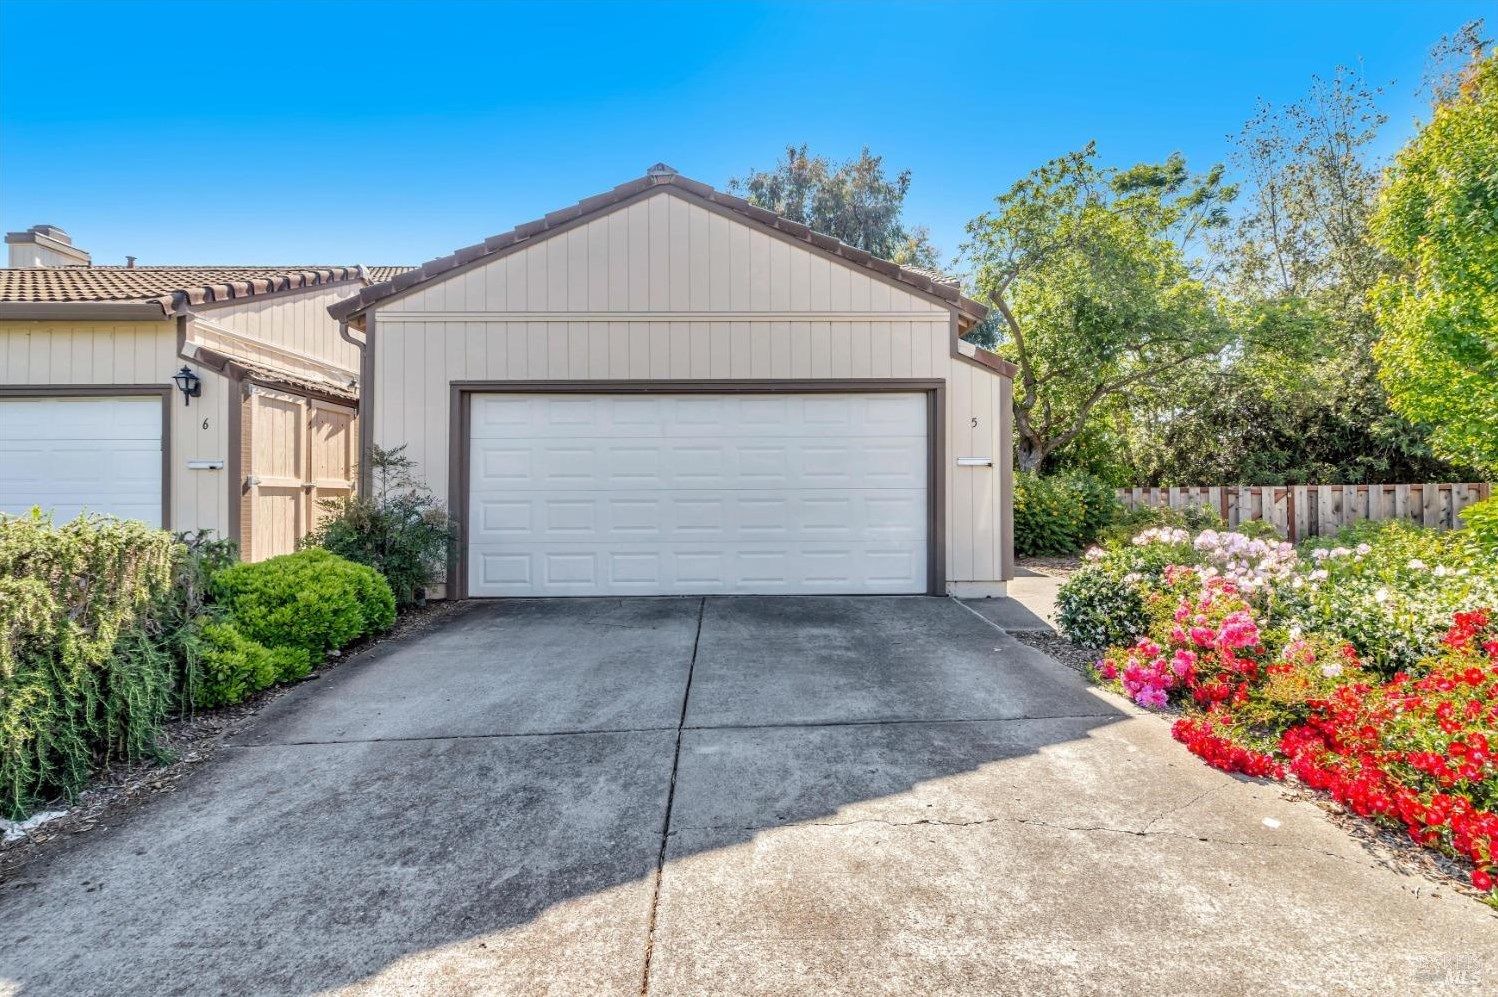 5 Knoll Ct, Rodeo, CA 94547